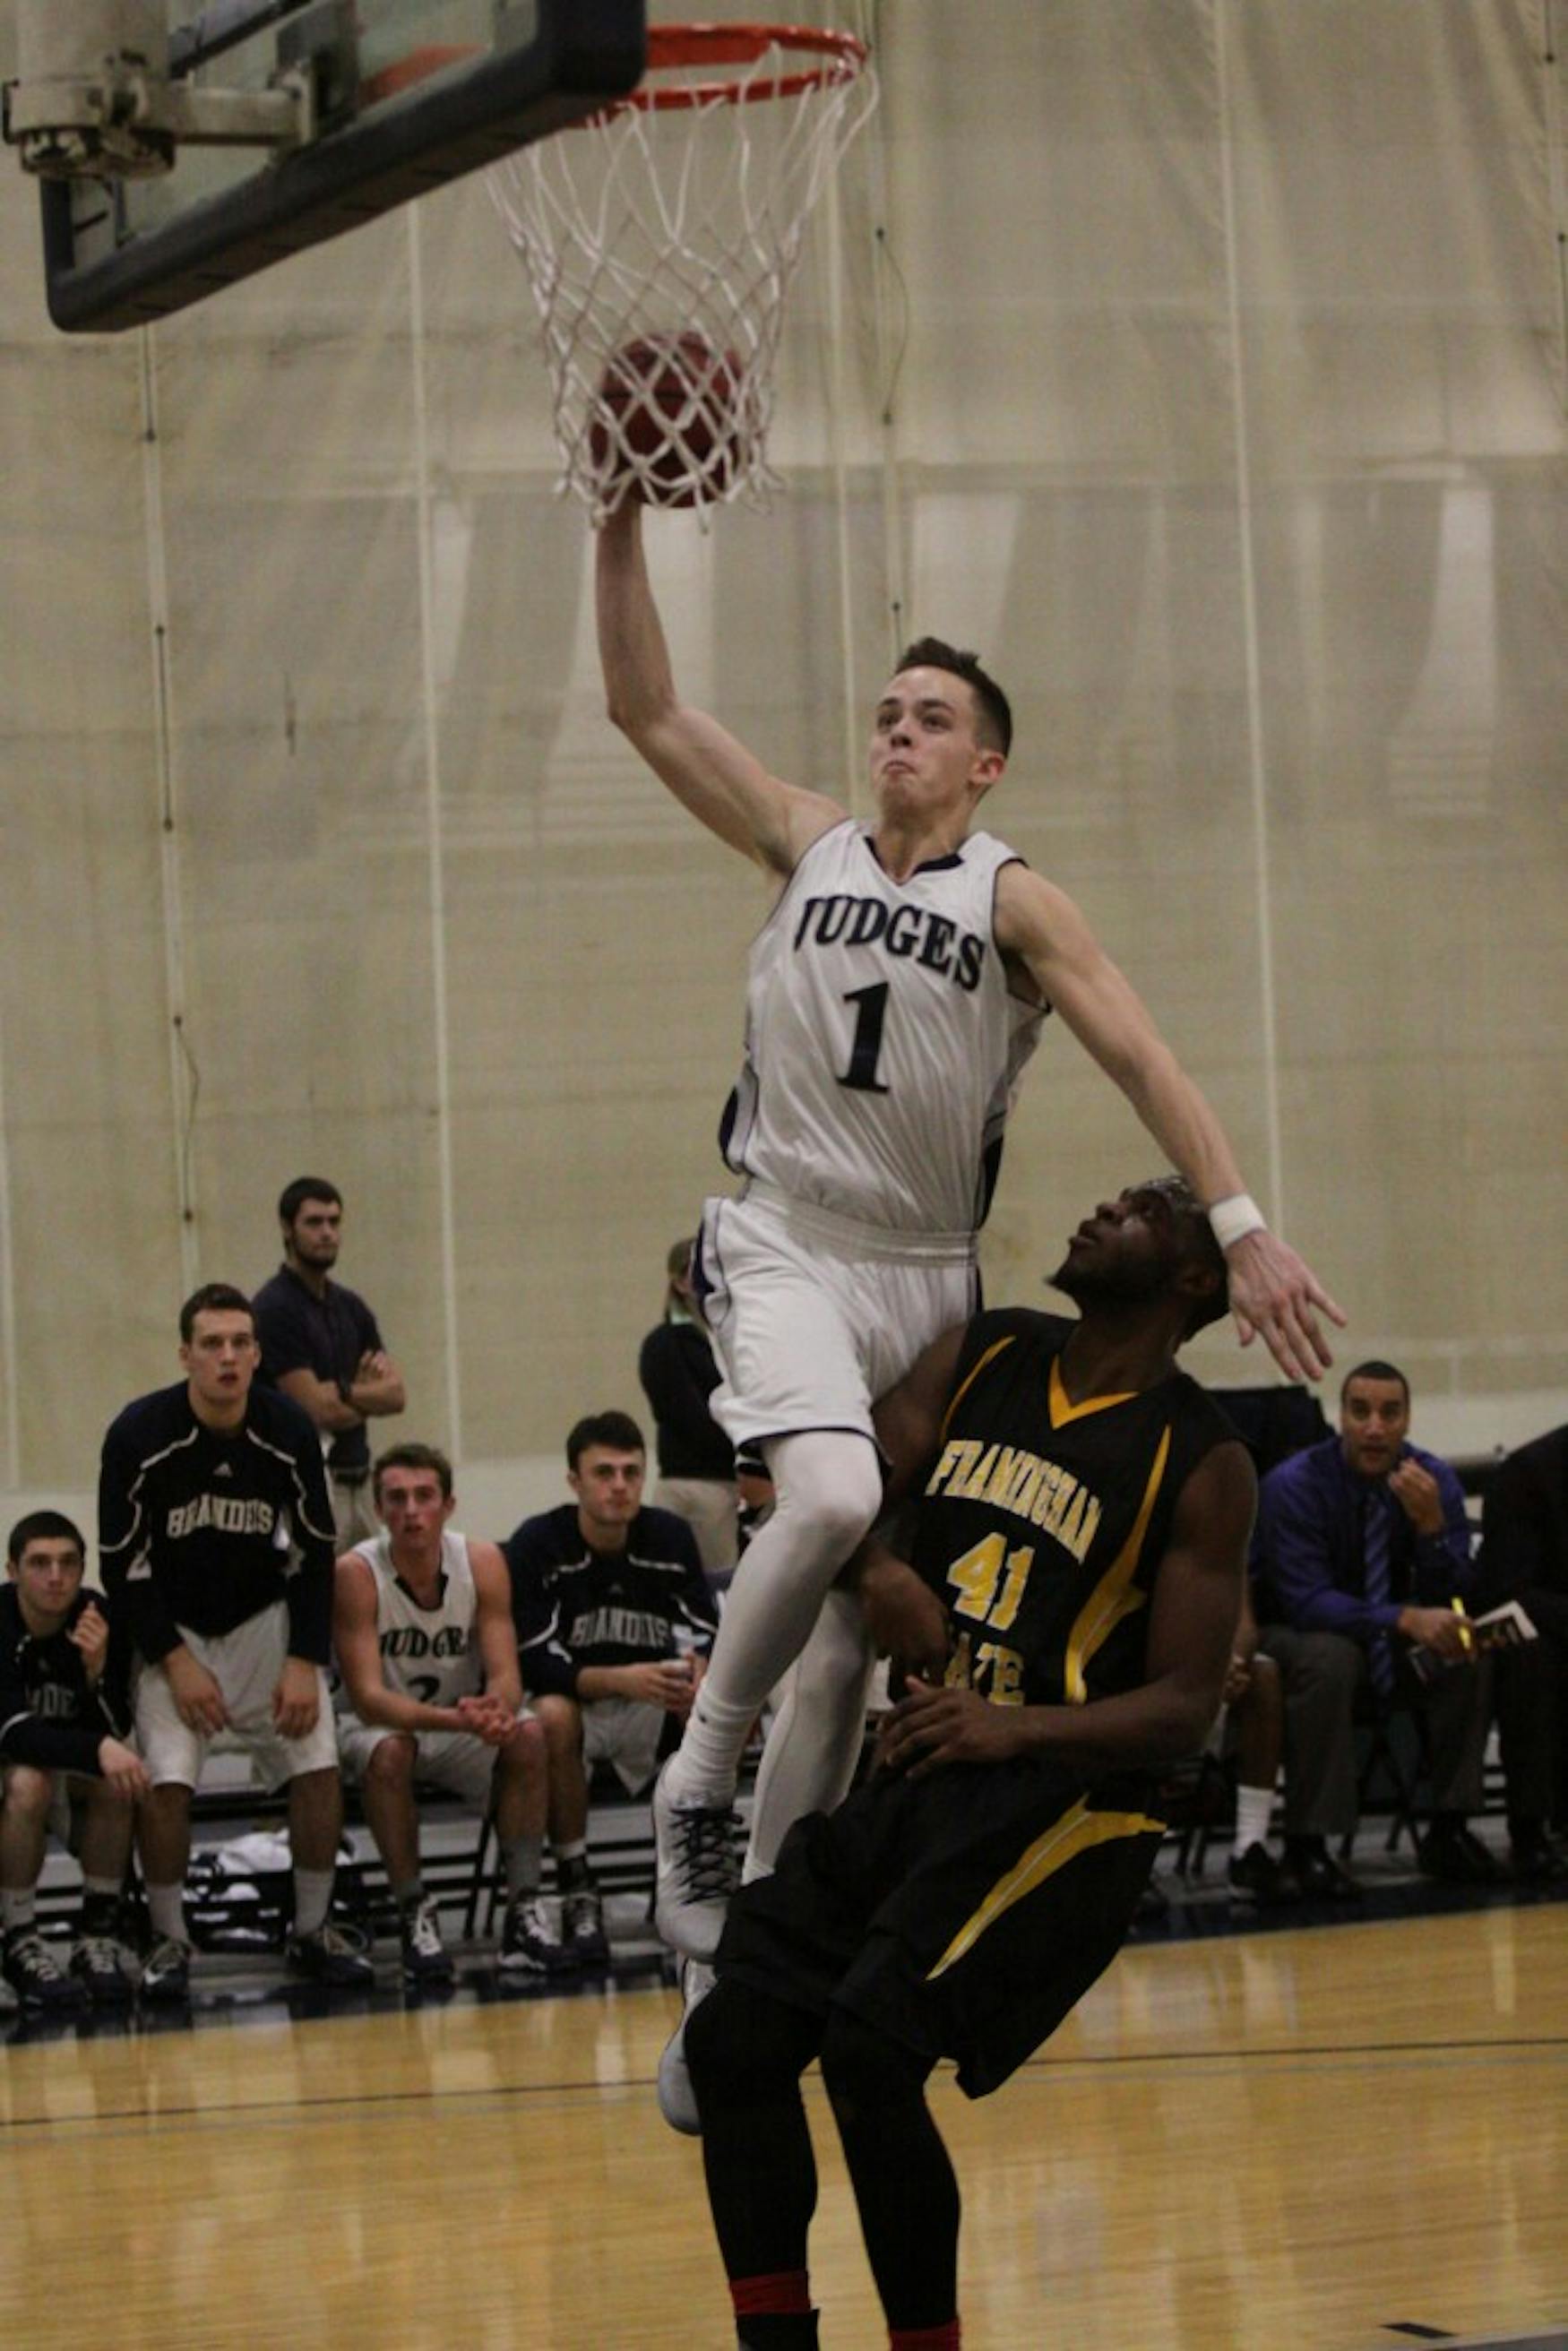 BRINGING IT HOME: Guard Tim Reale ’17 goes up for a slam dunk in the team’s 63-51 win over Framingham State University.